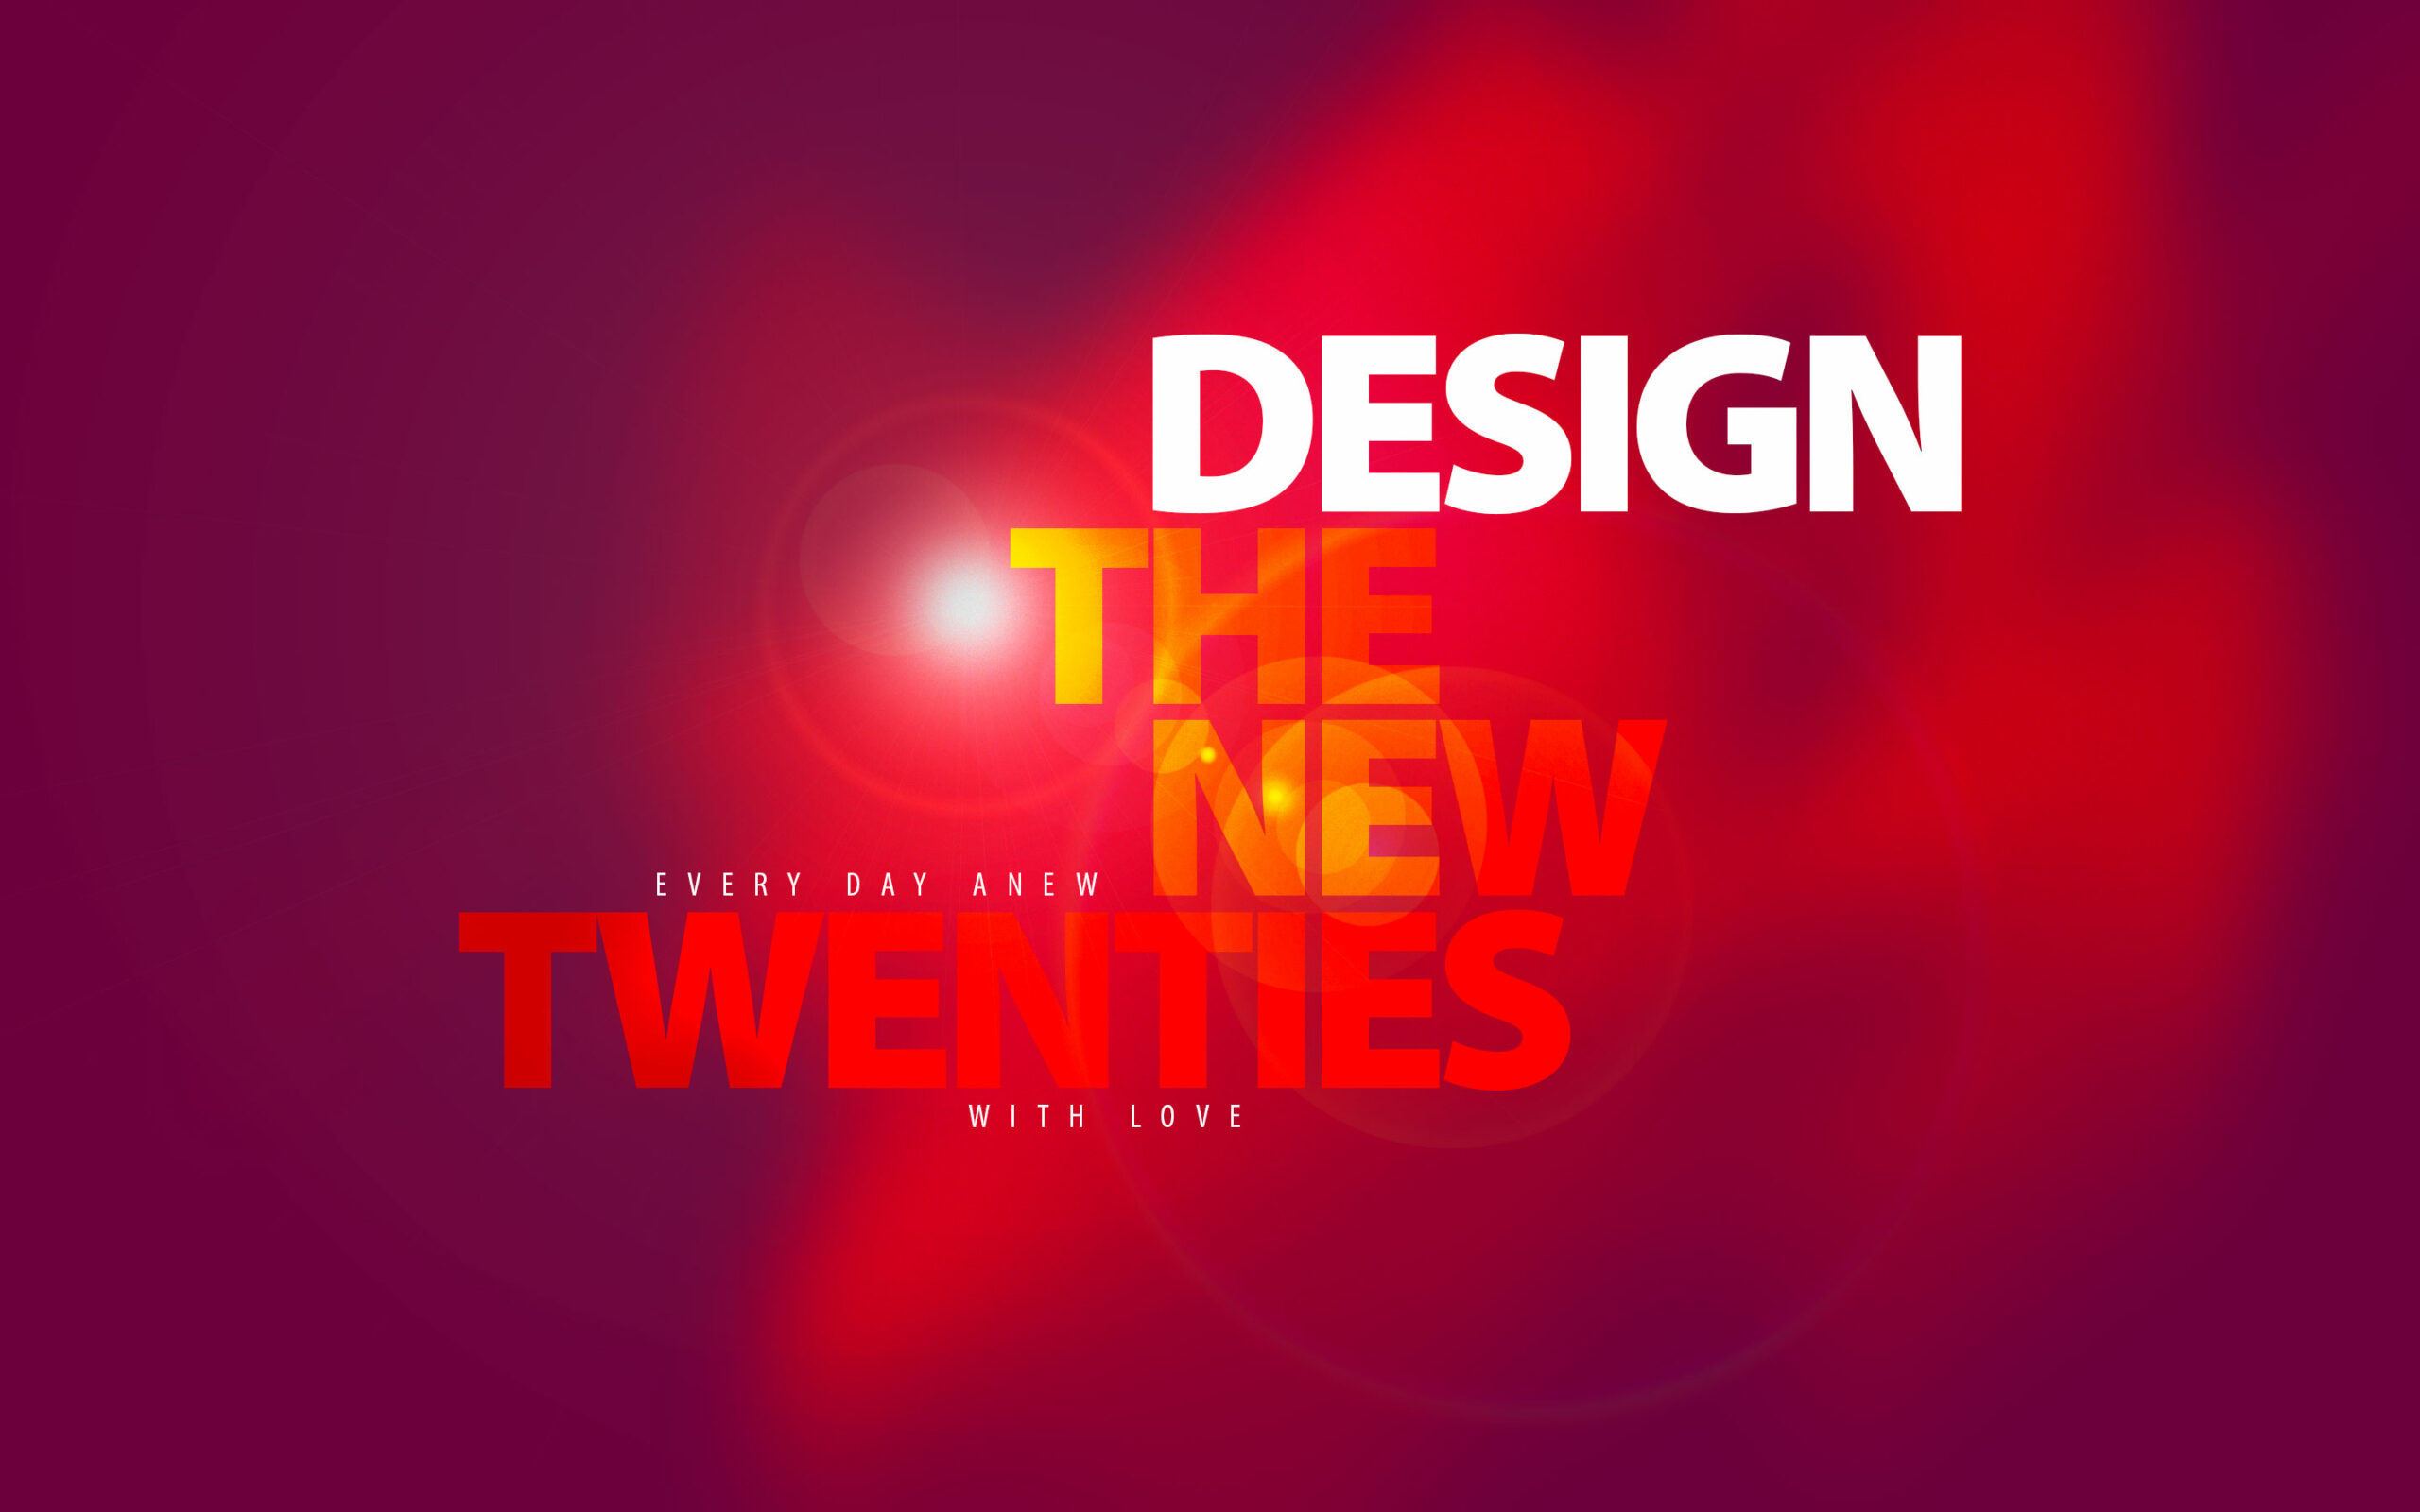 Design the New Twenties – Every day anew with Love (pink)